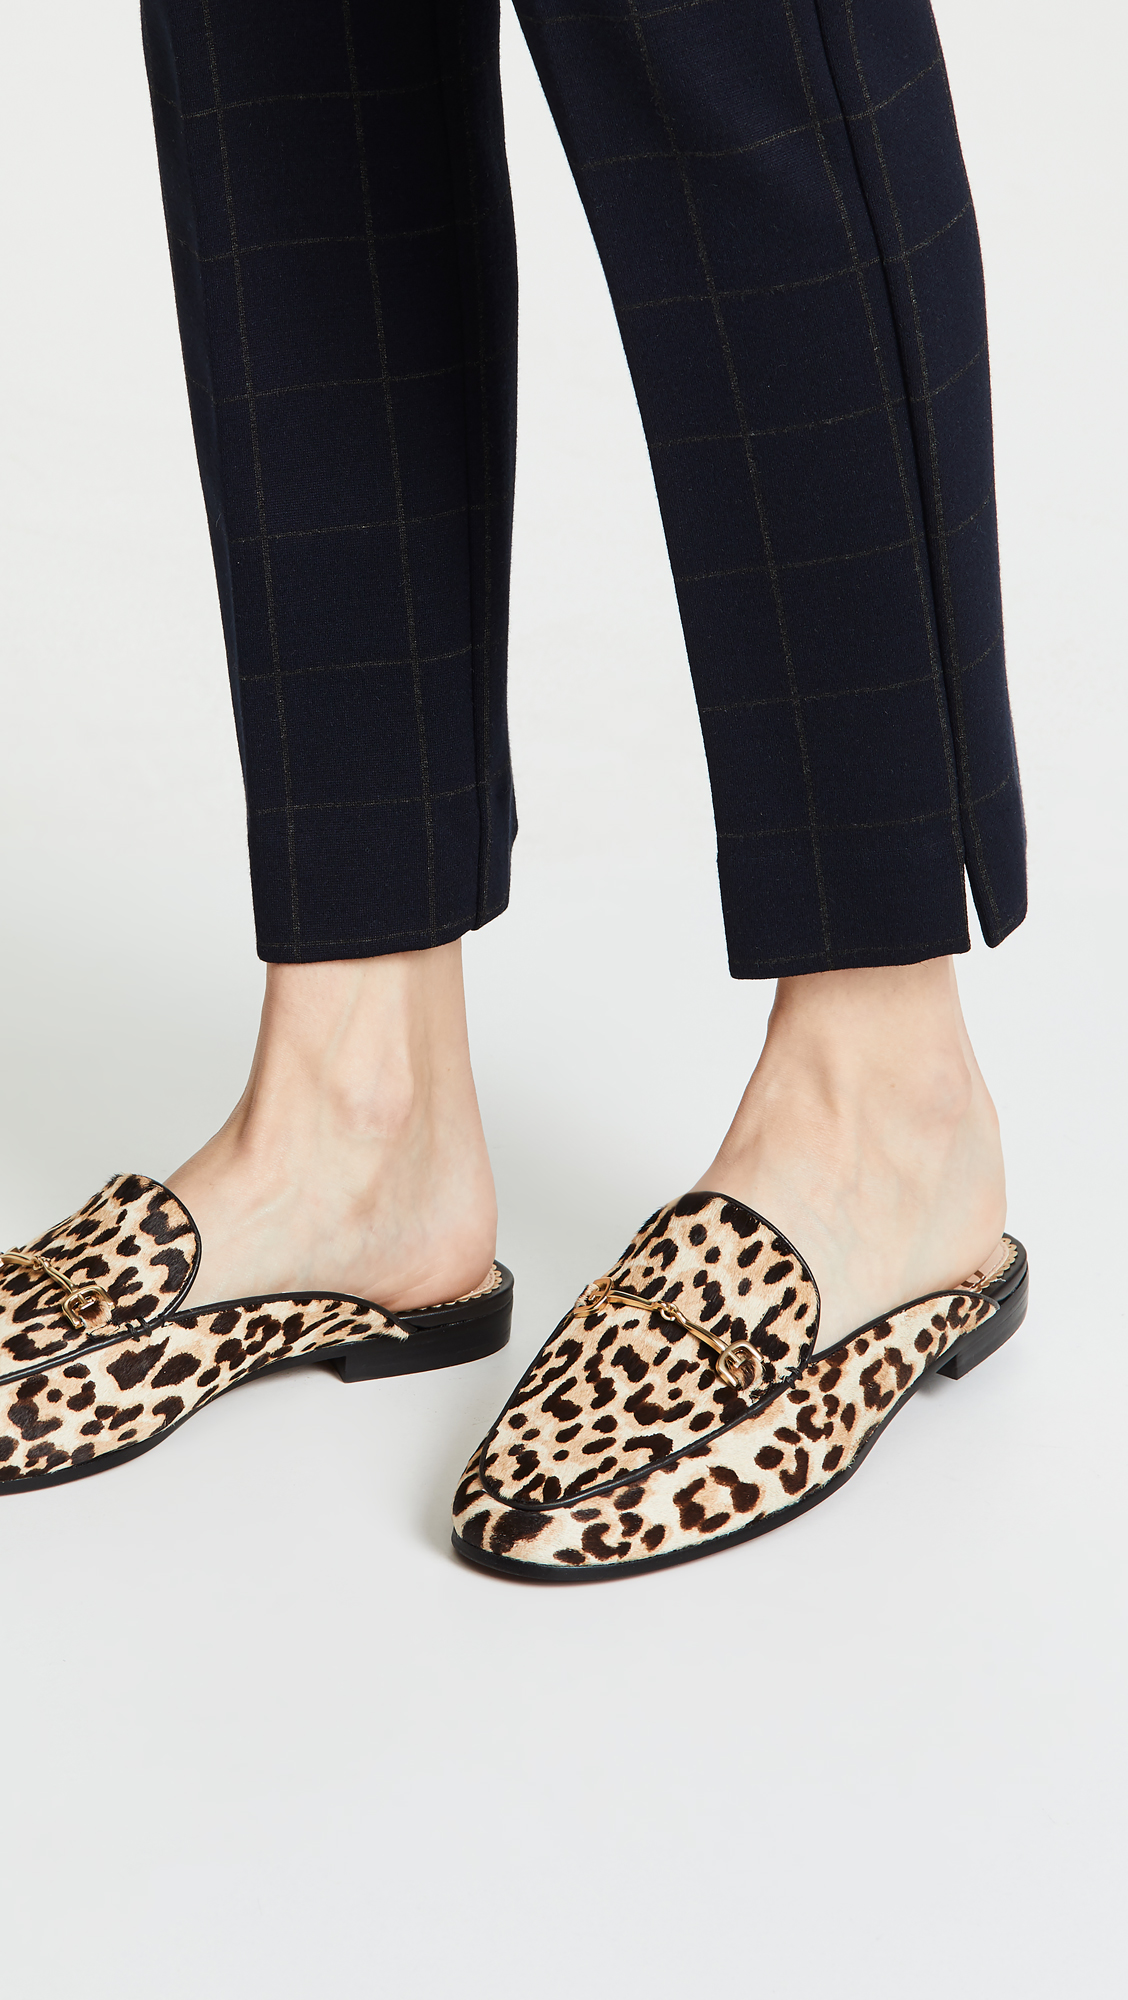 Leopard Print Mules with Gold Bar